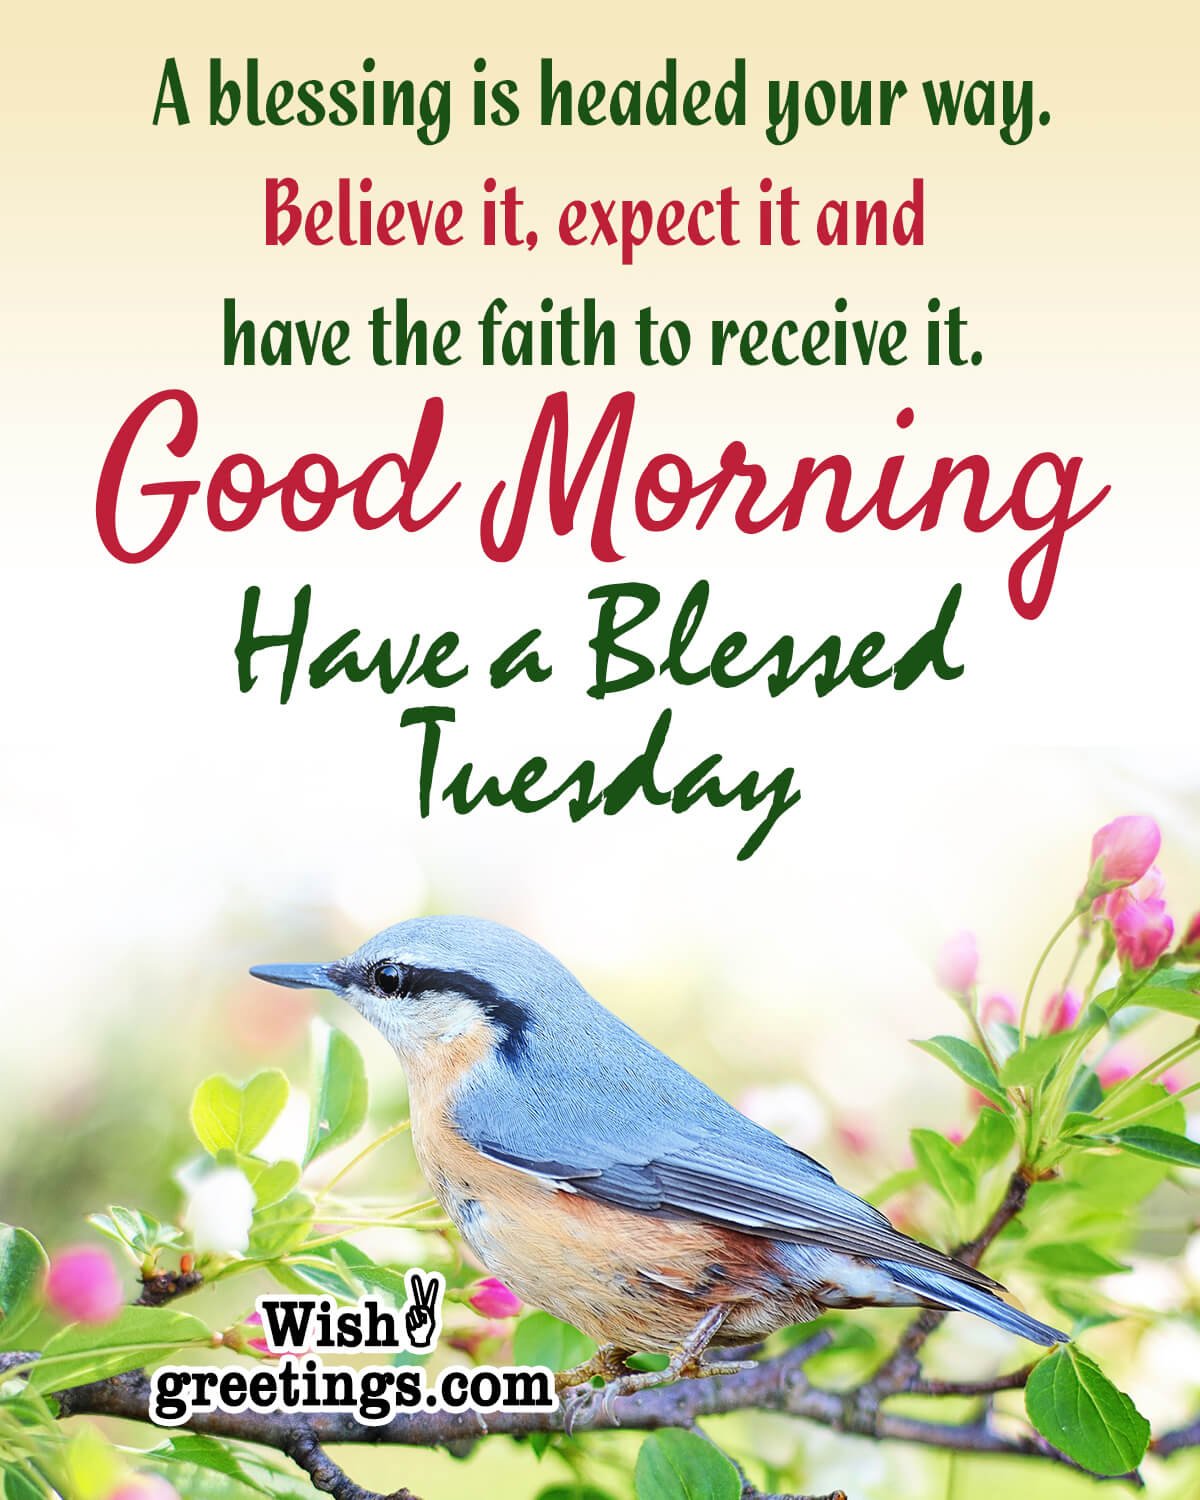 Best Tuesday Morning Wishes Quotes - Wish Greetings